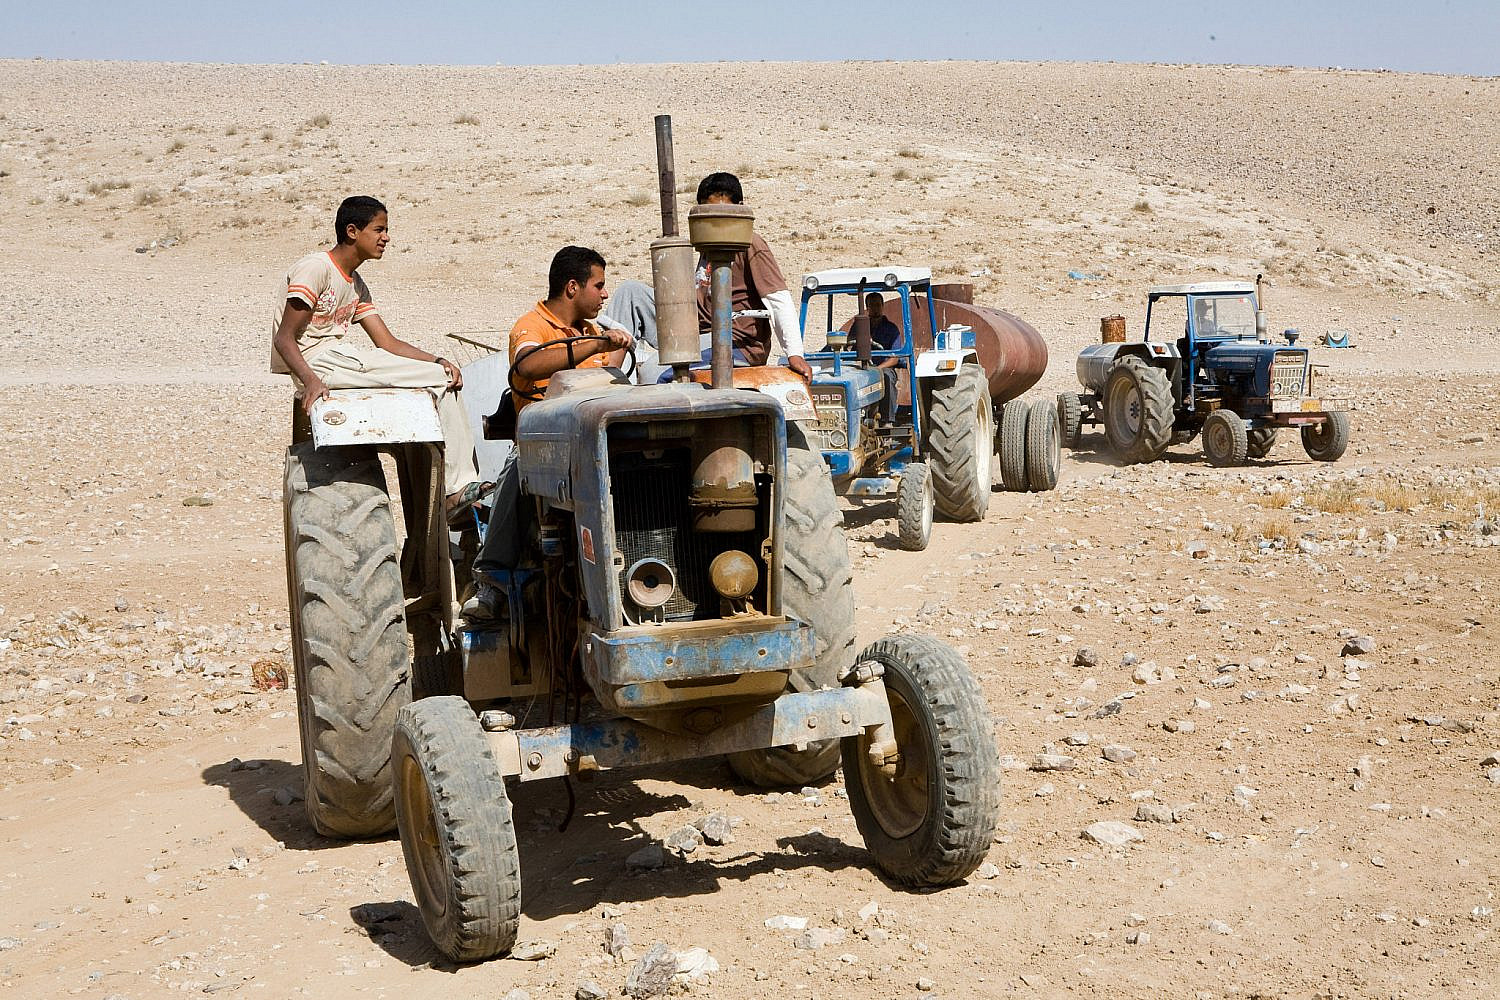 A water convoy to supply water to the unrecognized Bedouin village of Tel Arad in the Naqab/Negev desert, July 18, 2008. (Yotam Ronen/Activestills)